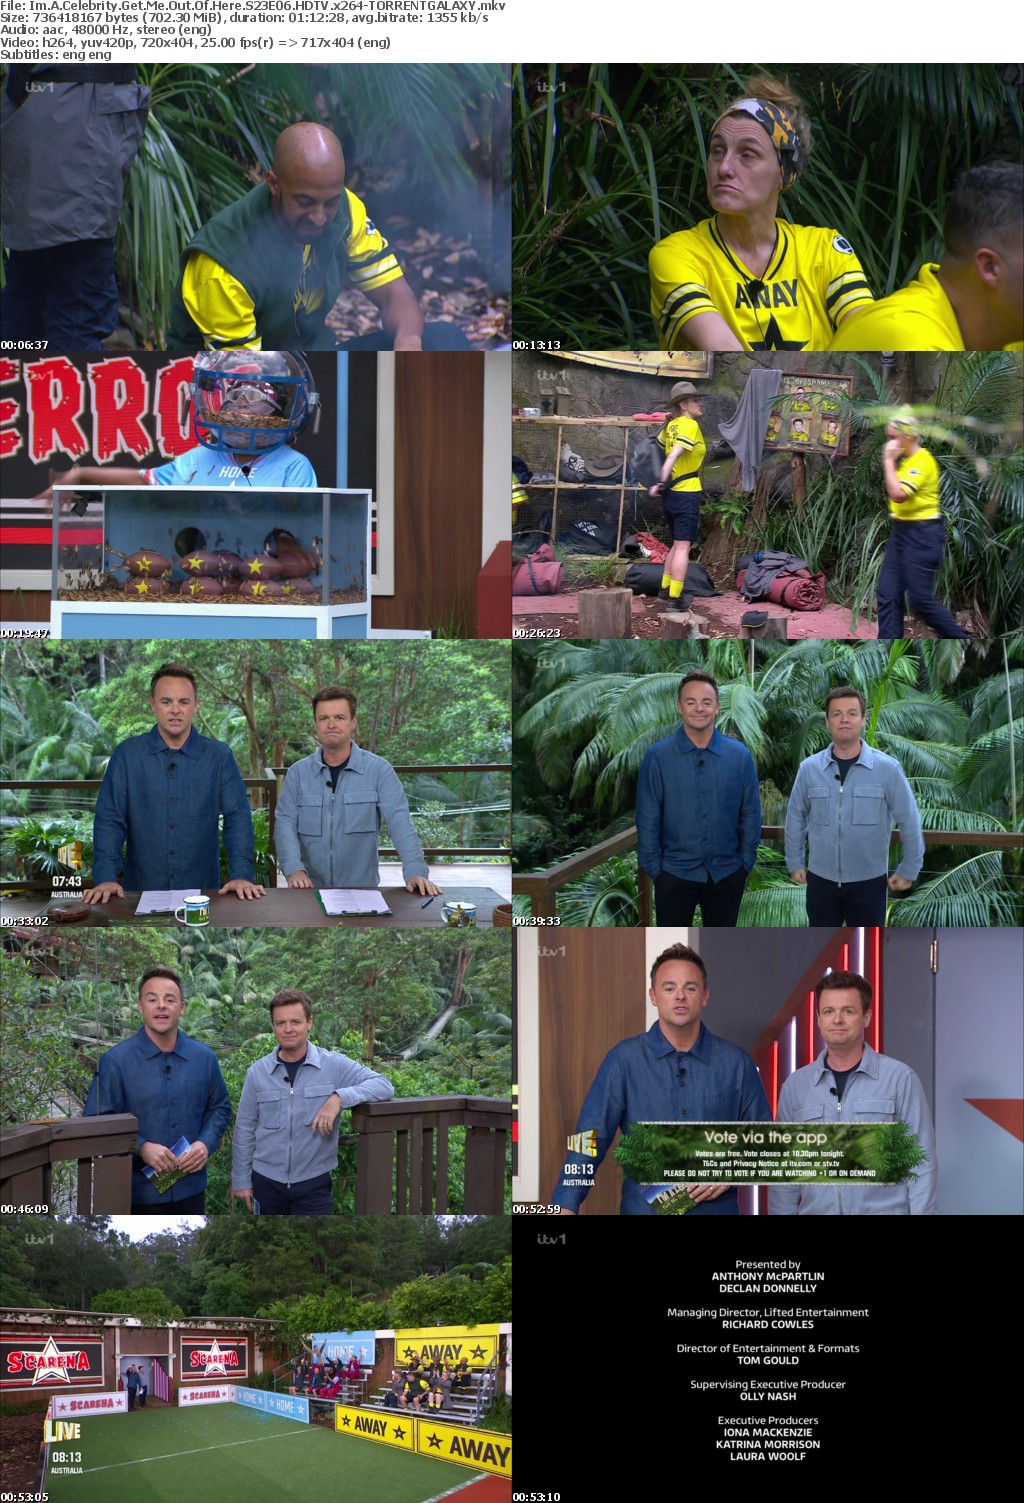 Im A Celebrity Get Me Out Of Here S23E06 HDTV x264-GALAXY